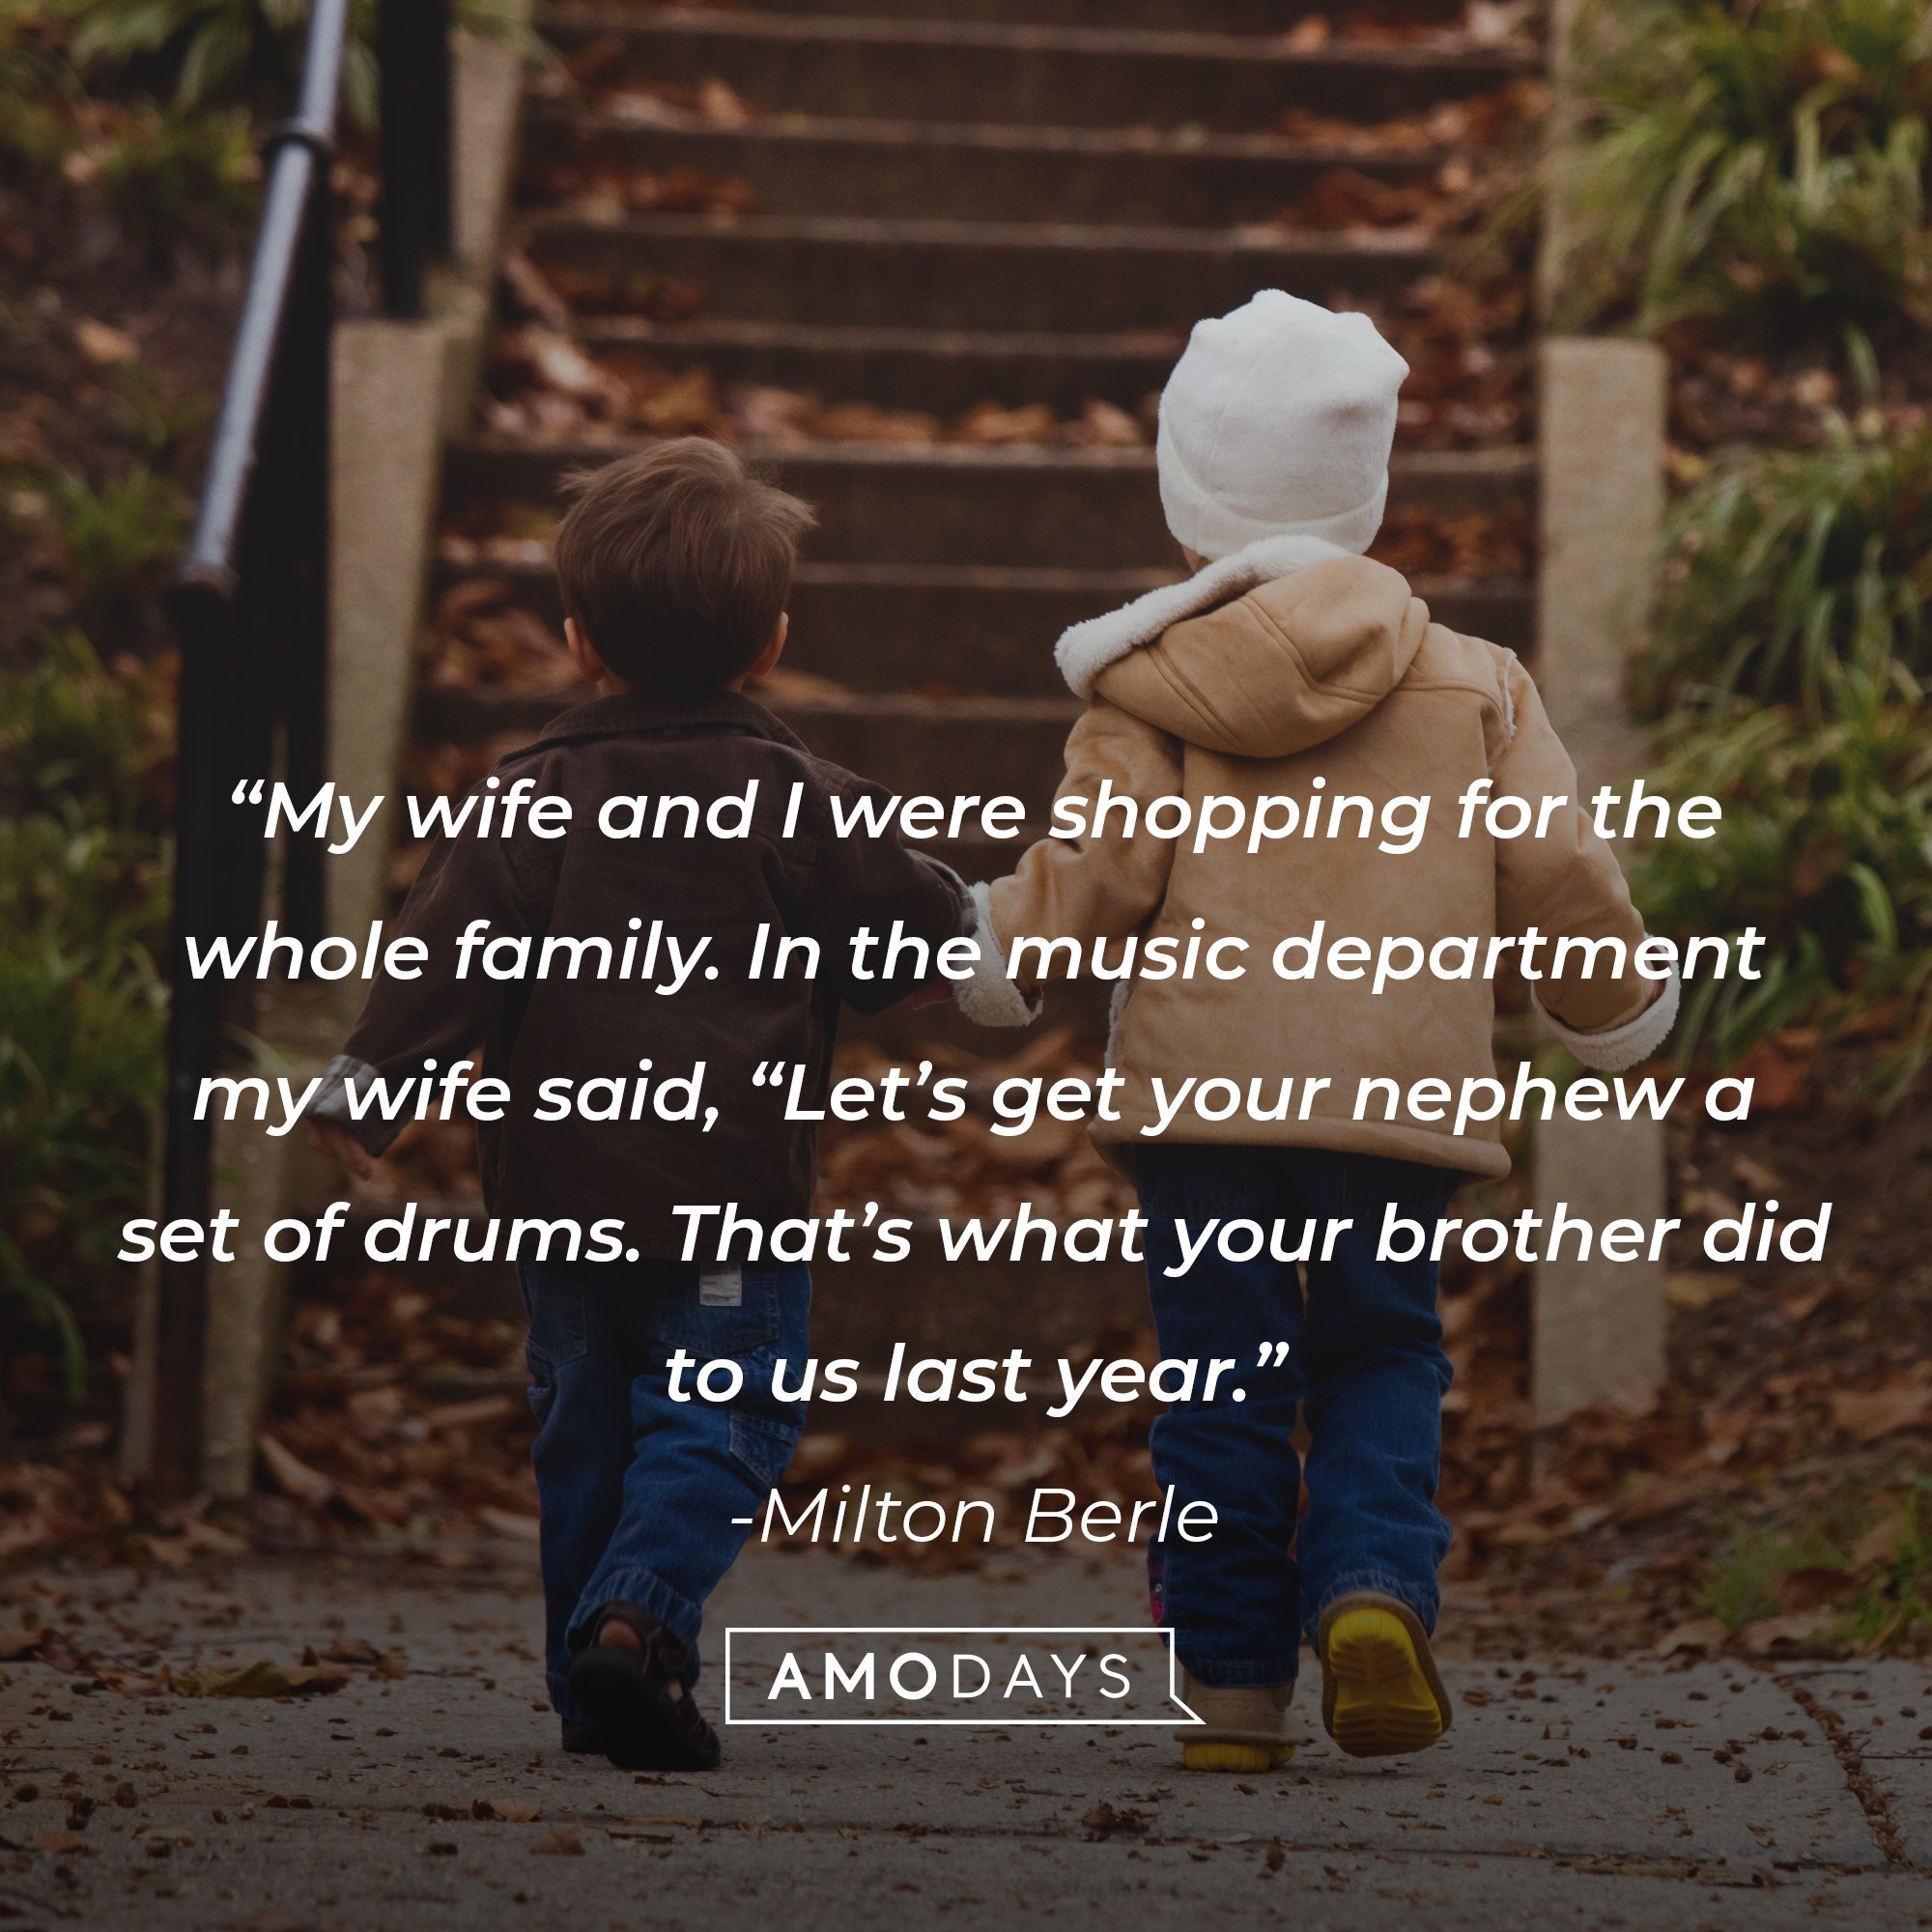 Milton Berle's quote: “My wife and I were shopping for the whole family. In the music department my wife said, “Let’s get your nephew a set of drums. That’s what your brother did to us last year.” | Image: AmoDays